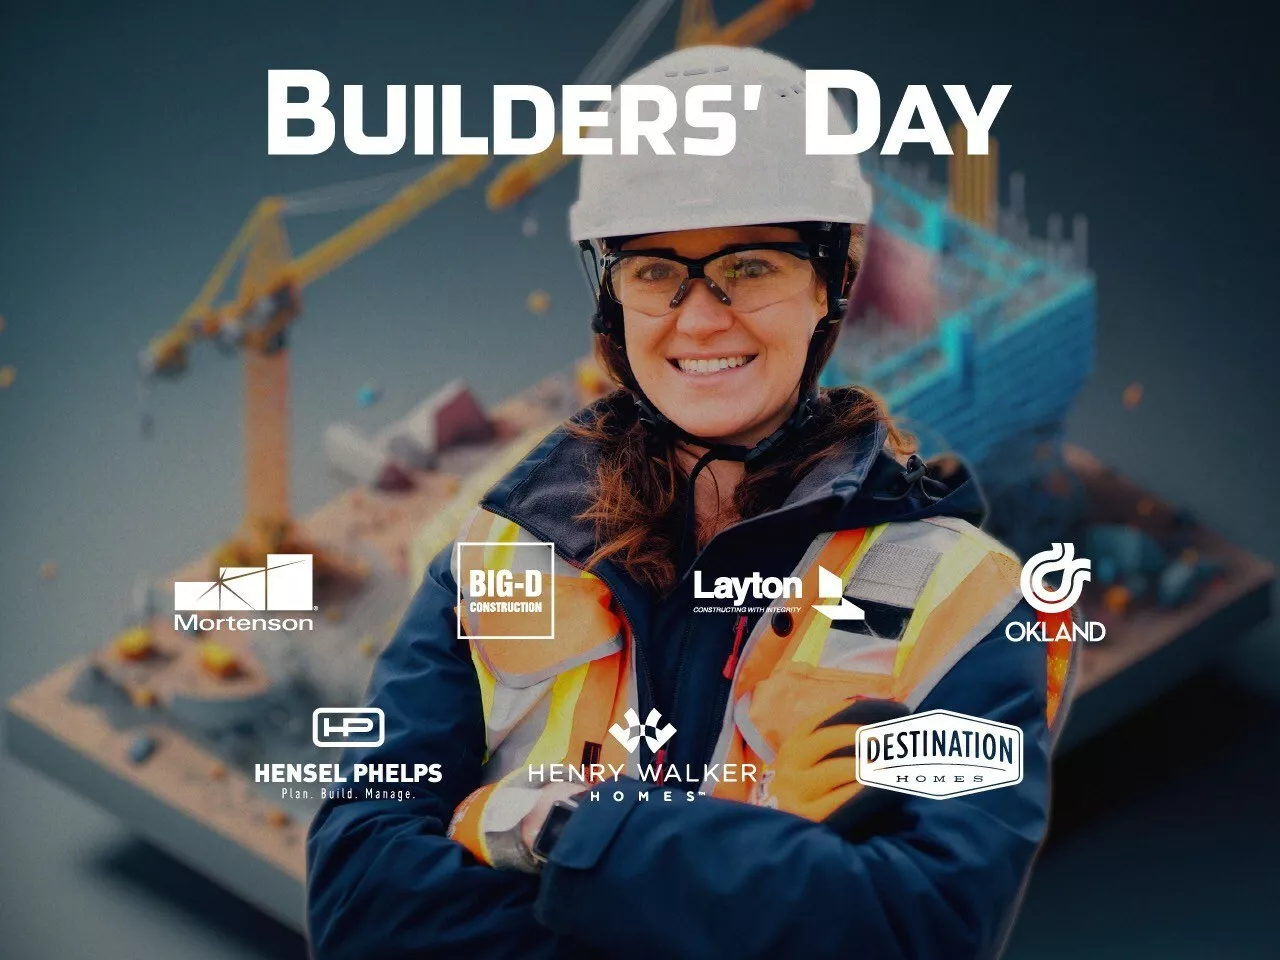 Utah's inaugural Builder's Day, taking place on April 12 at Salt Lake Community College's (SLCC) Taylorsville Redwood campus, is presented by members of state's largest and most impactful construction firms, including Mortenson, Big-D Companies, Layton Construction, Hensel Phelps, Destination Homes, Okland Construction, and Henry Walker Homes. img#1